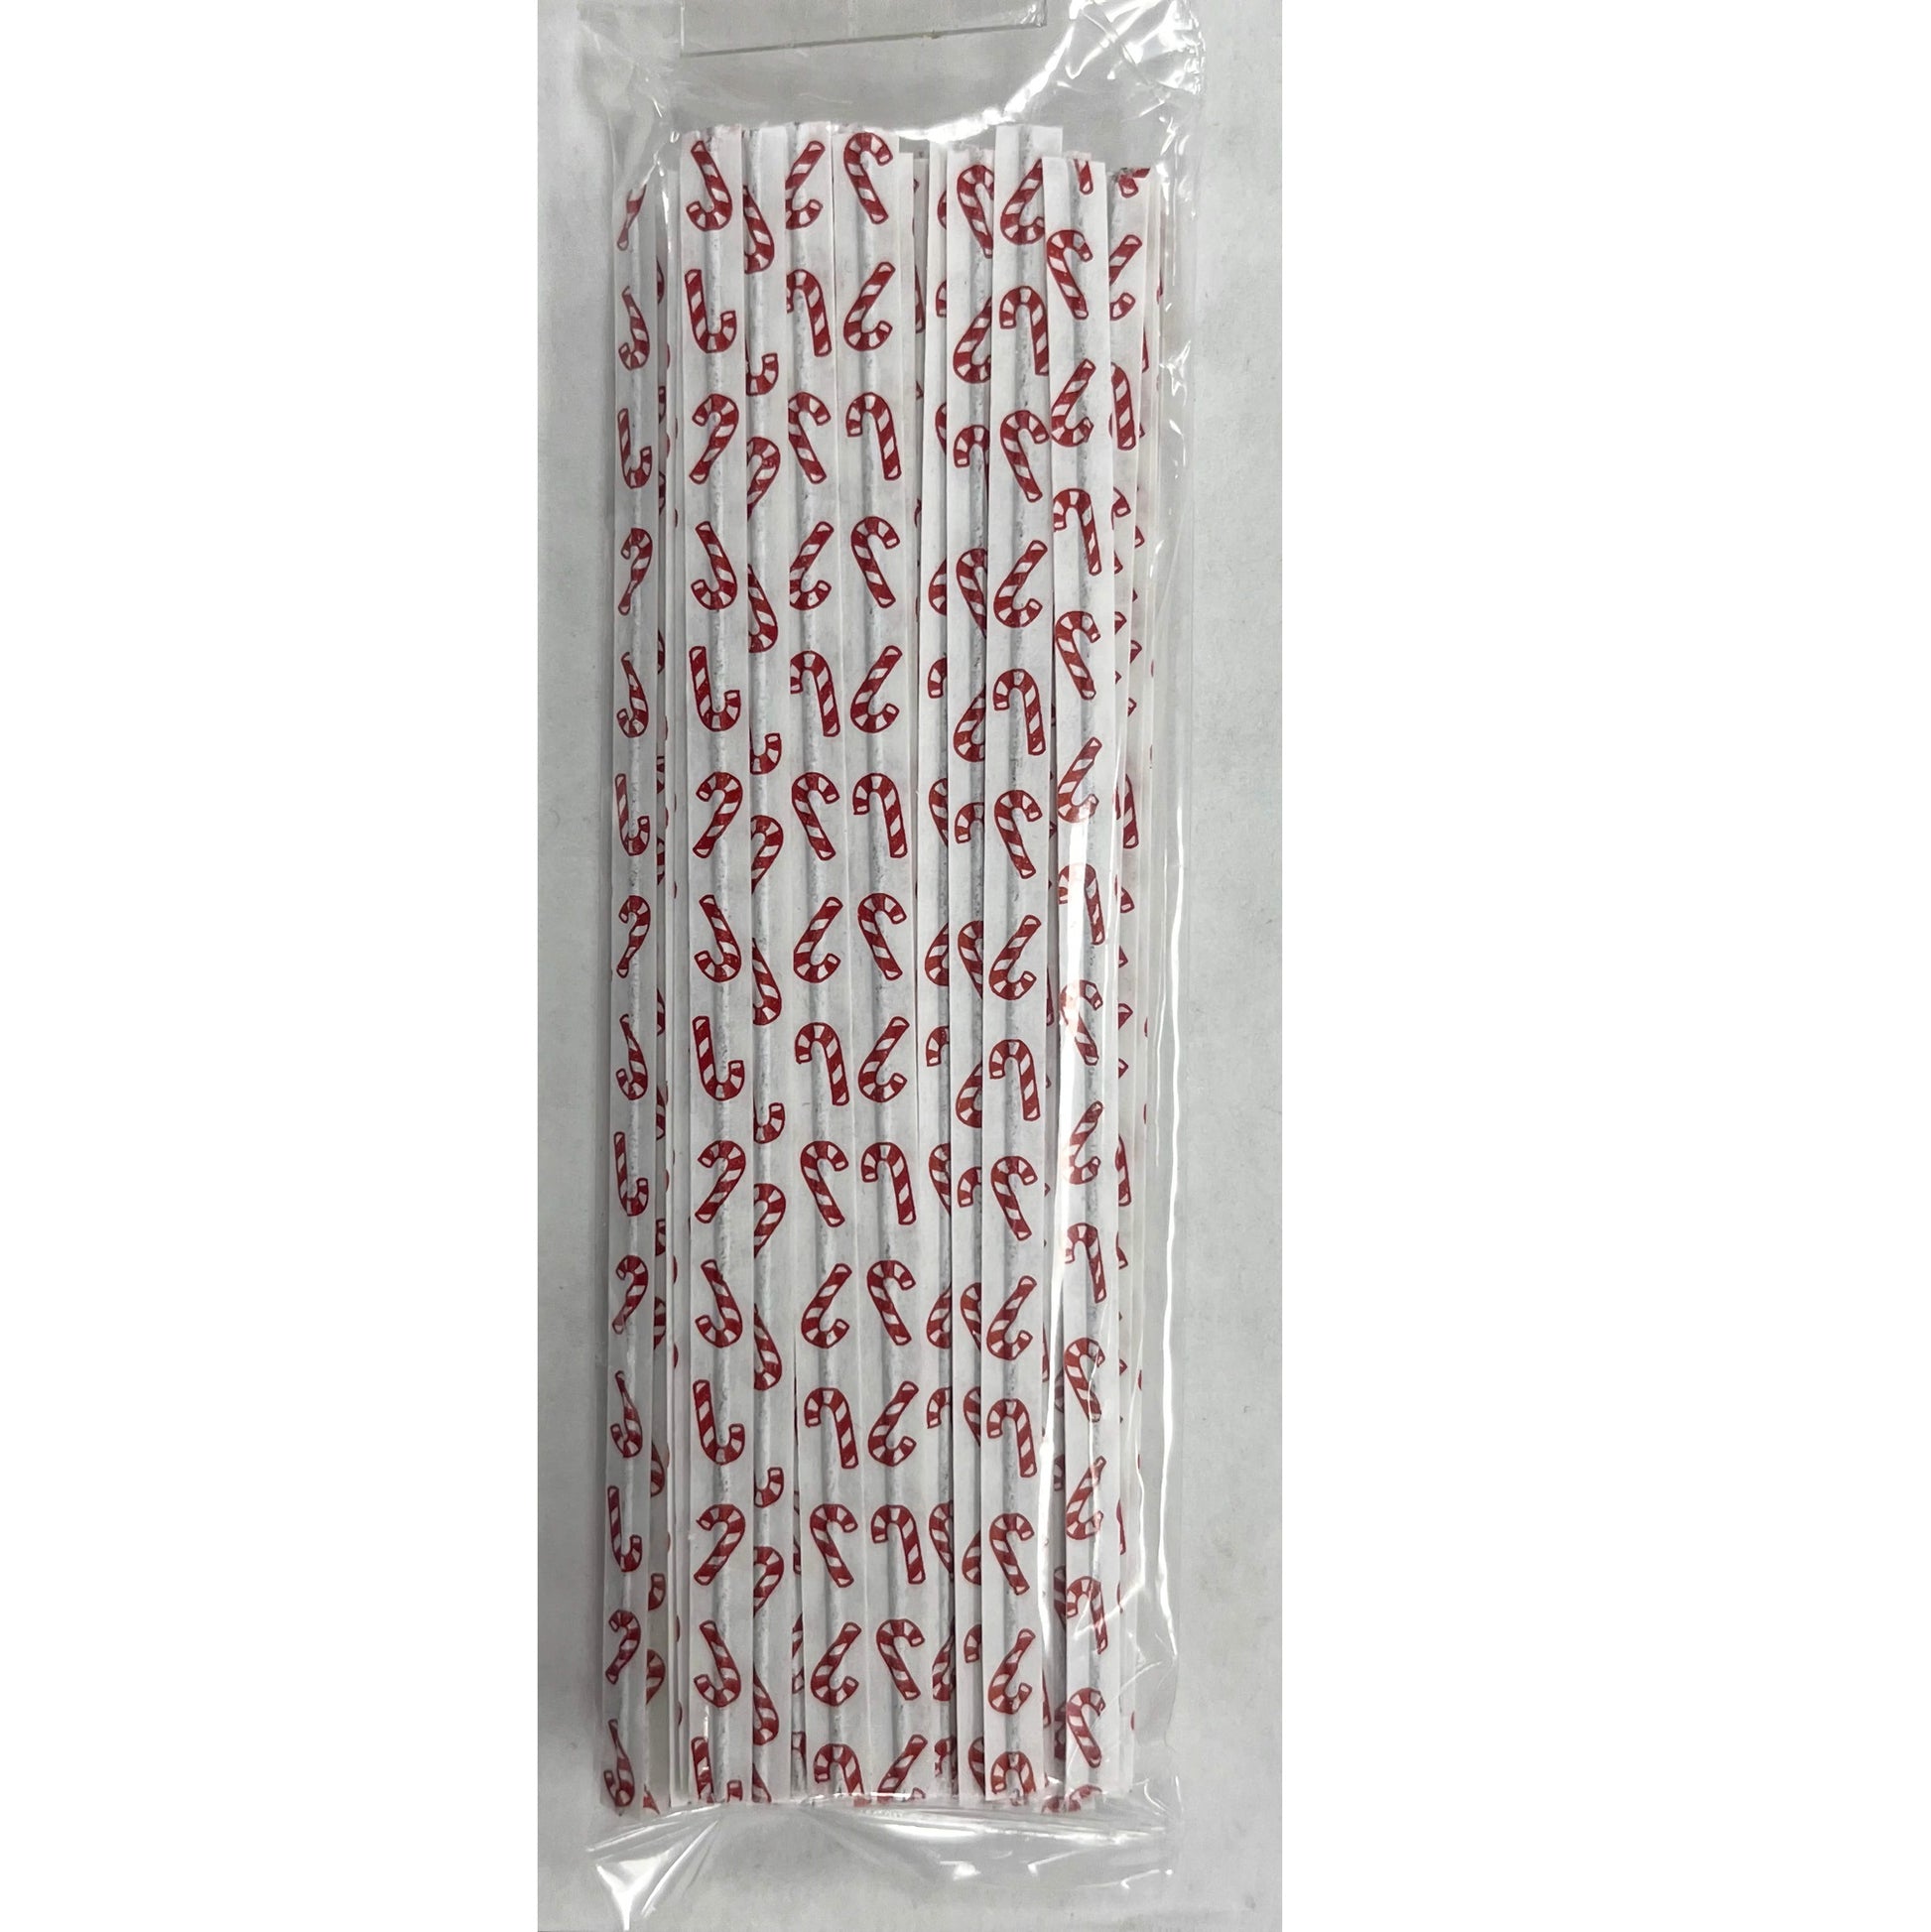 A pack of 100 paper twist ties, each decorated with a red and white candy cane pattern. The twist ties are neatly arranged in multiple rows within a clear plastic packaging, which allows the festive design to be visible. The background is plain and white, emphasizing the contrast of the candy cane stripes on the ties.